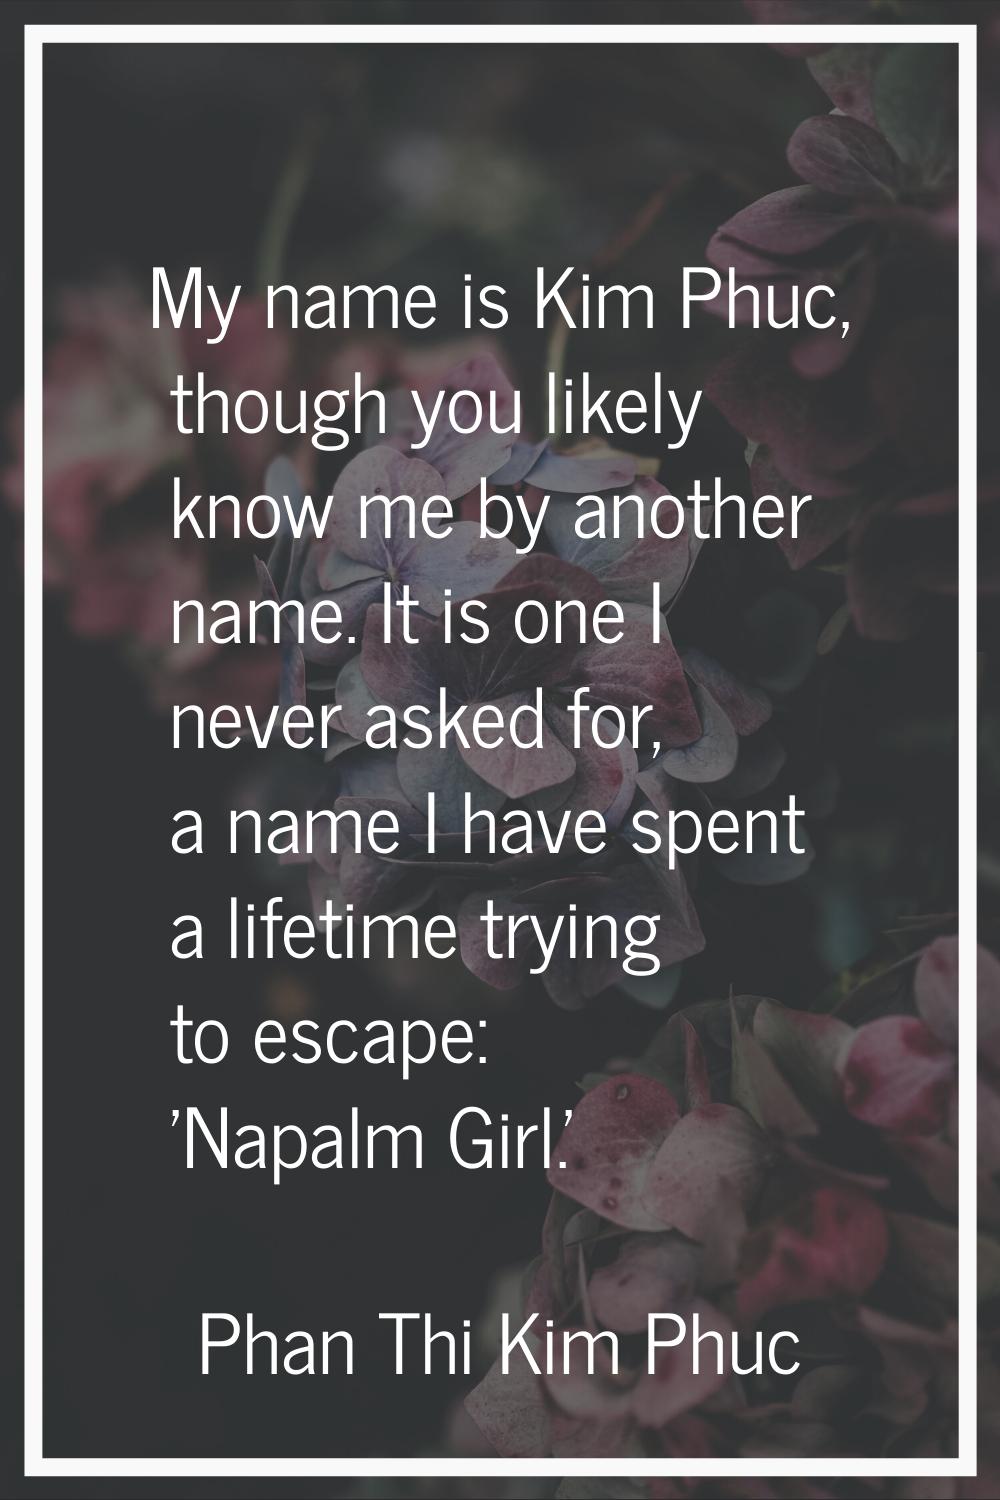 My name is Kim Phuc, though you likely know me by another name. It is one I never asked for, a name